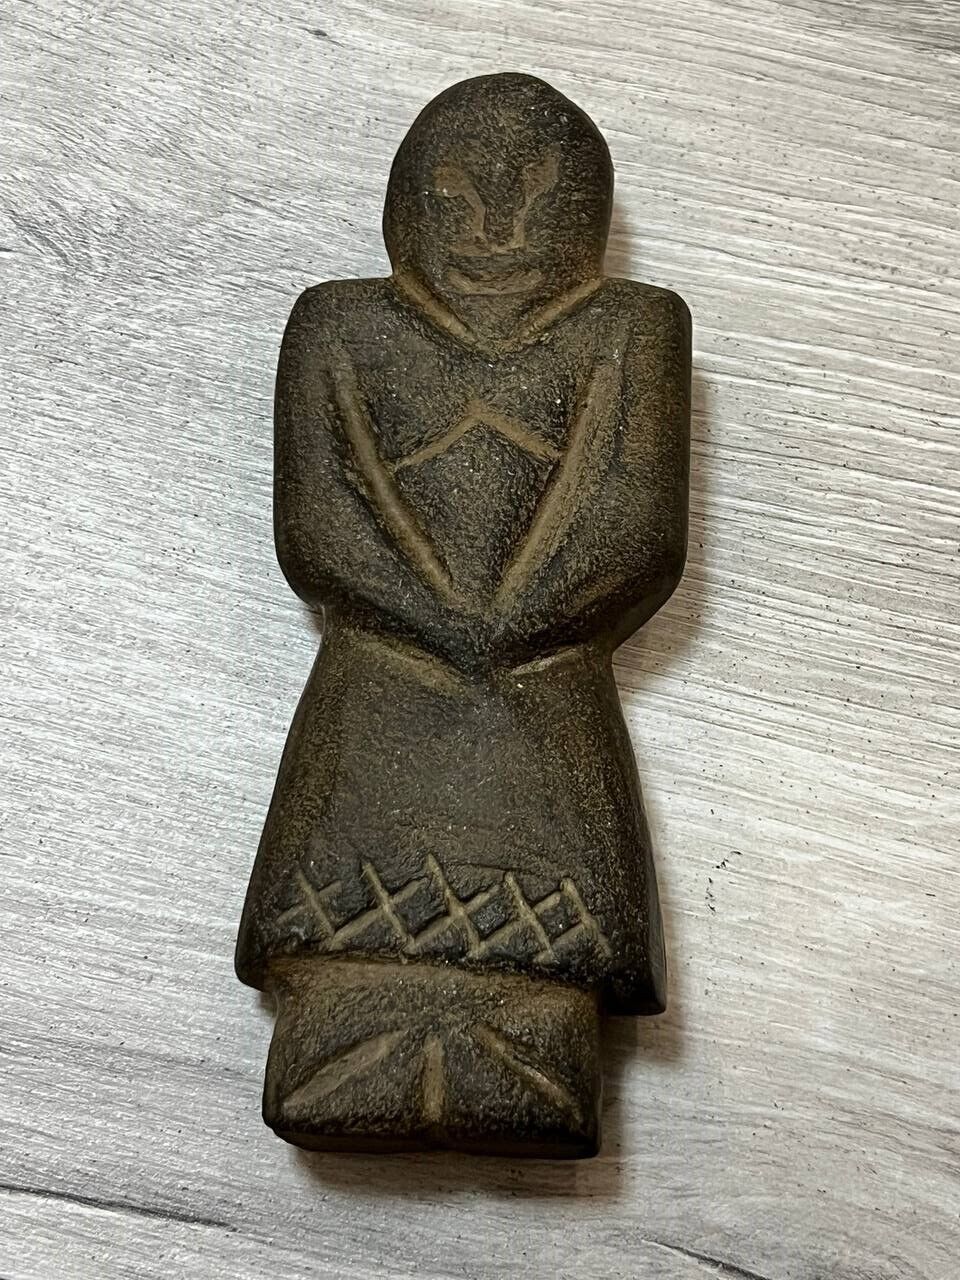 The ancient stone woman is an artifact of the Scythian culture.3-5 CENTURY